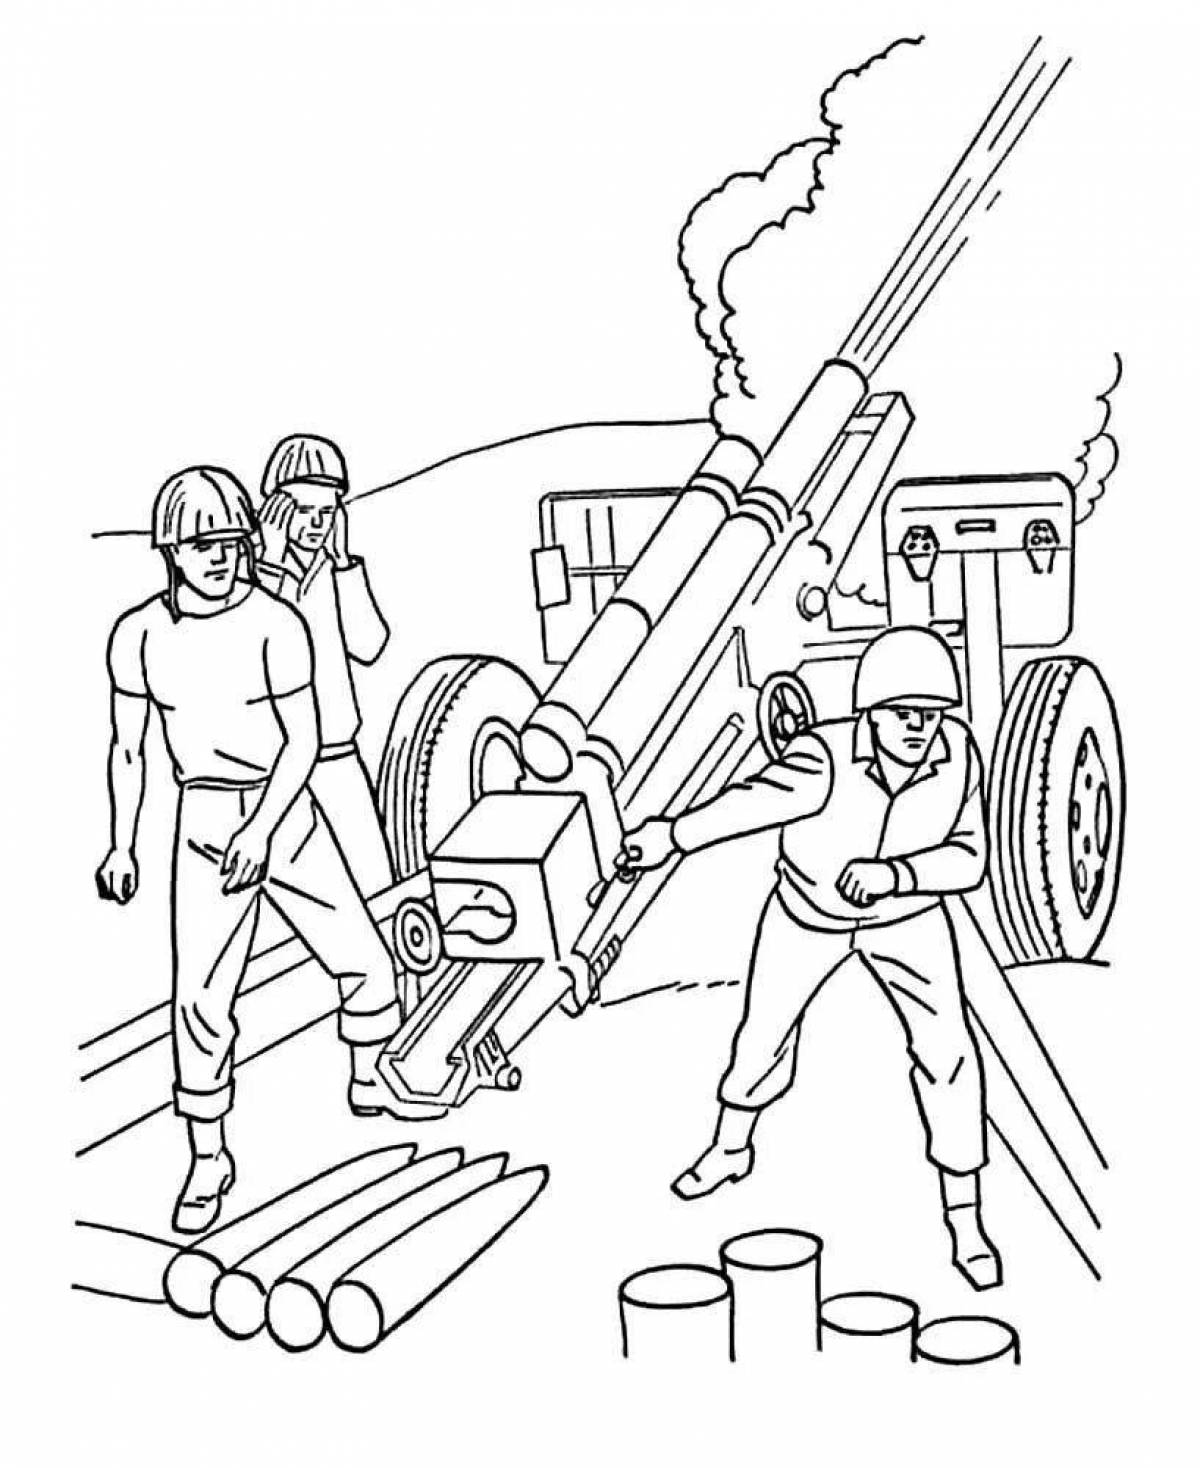 Soldier's front coloring page